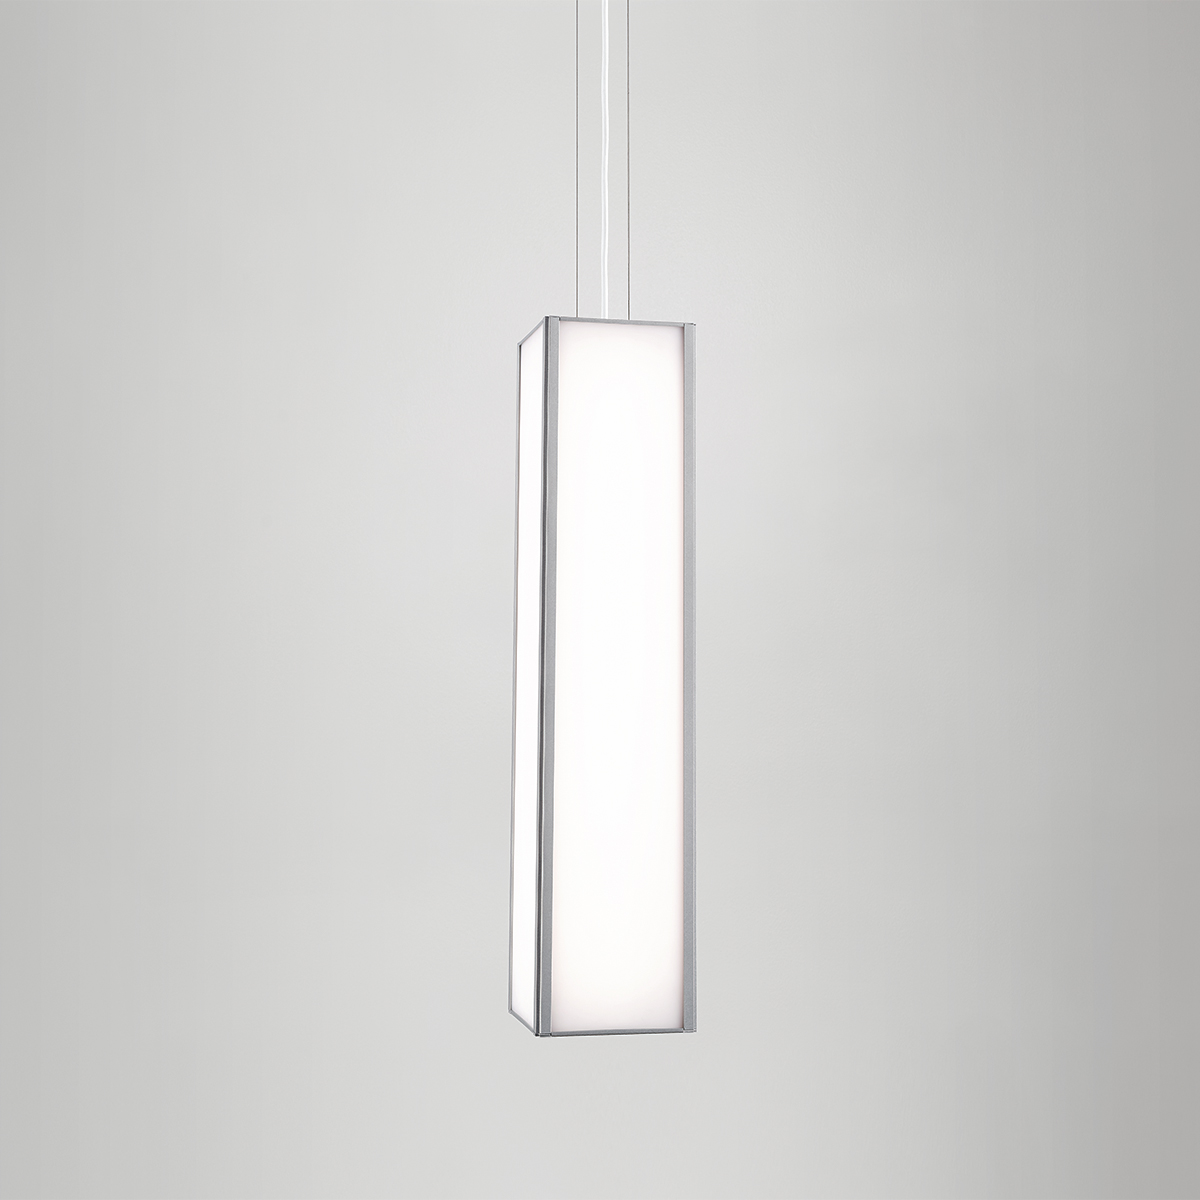 A large, rectangular pendant with a frame and luminous diffuser body 